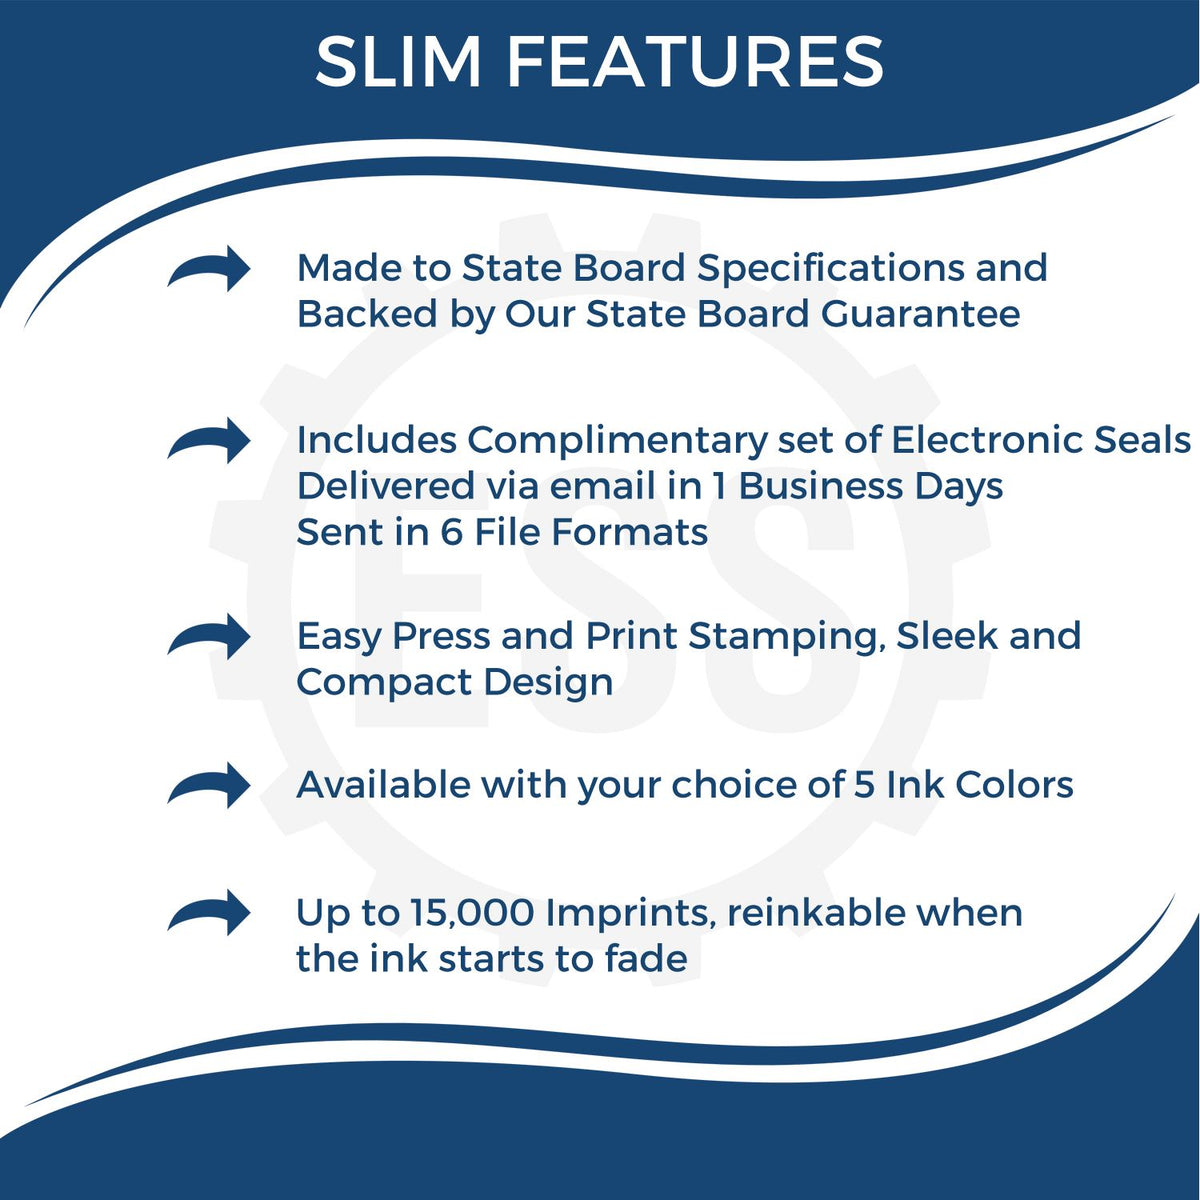 A picture of an infographic highlighting the selling points for the Super Slim Indiana Notary Public Stamp